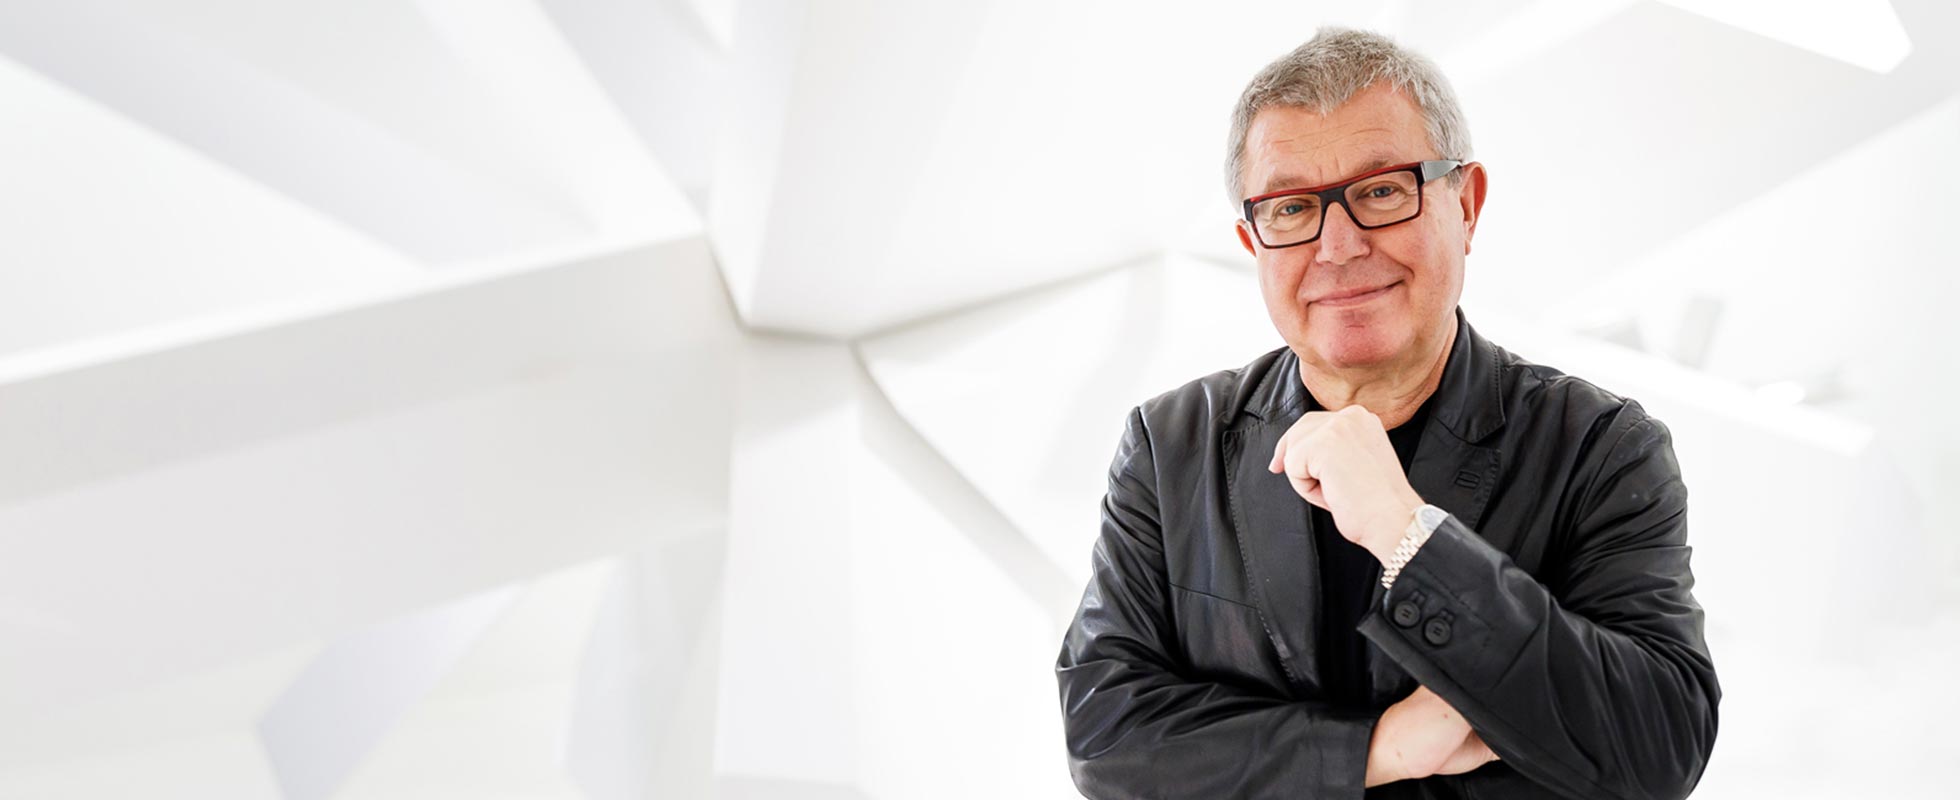 Daniel Libeskind<br/>And a new sparkling star